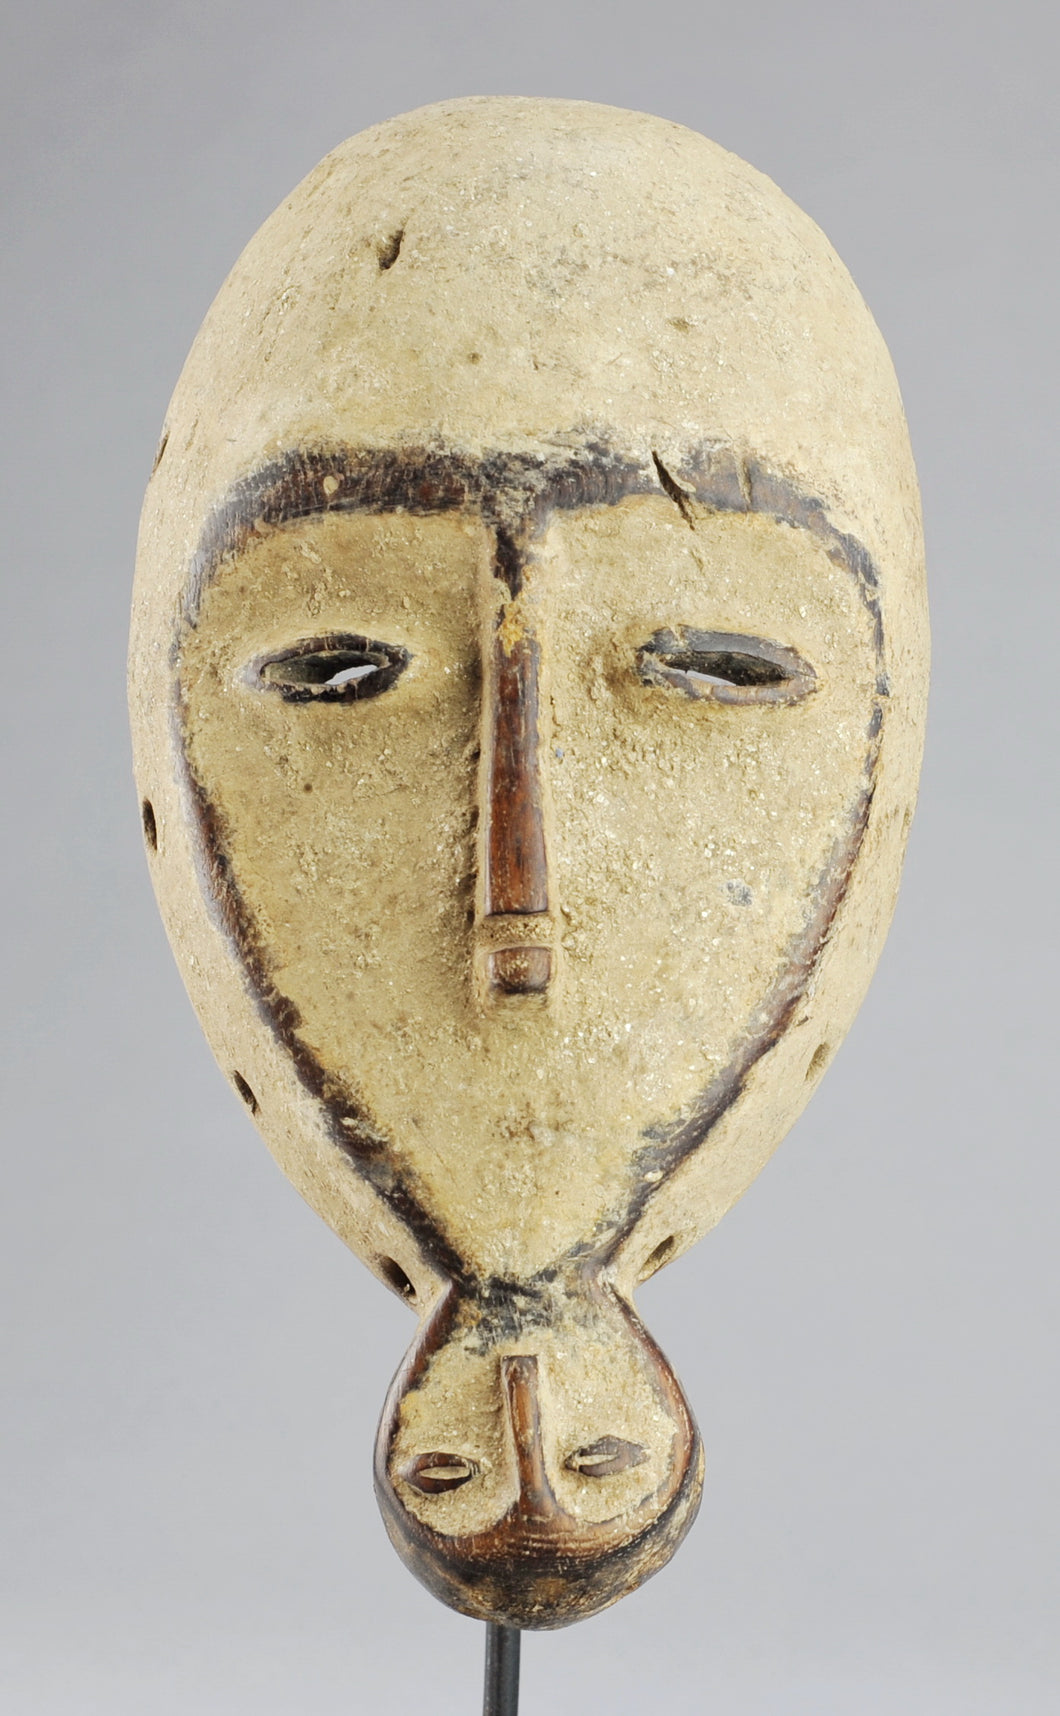 SOLD / SOLD! Exceptional Mask Idimu LEGA Exceptional Mask MC0869